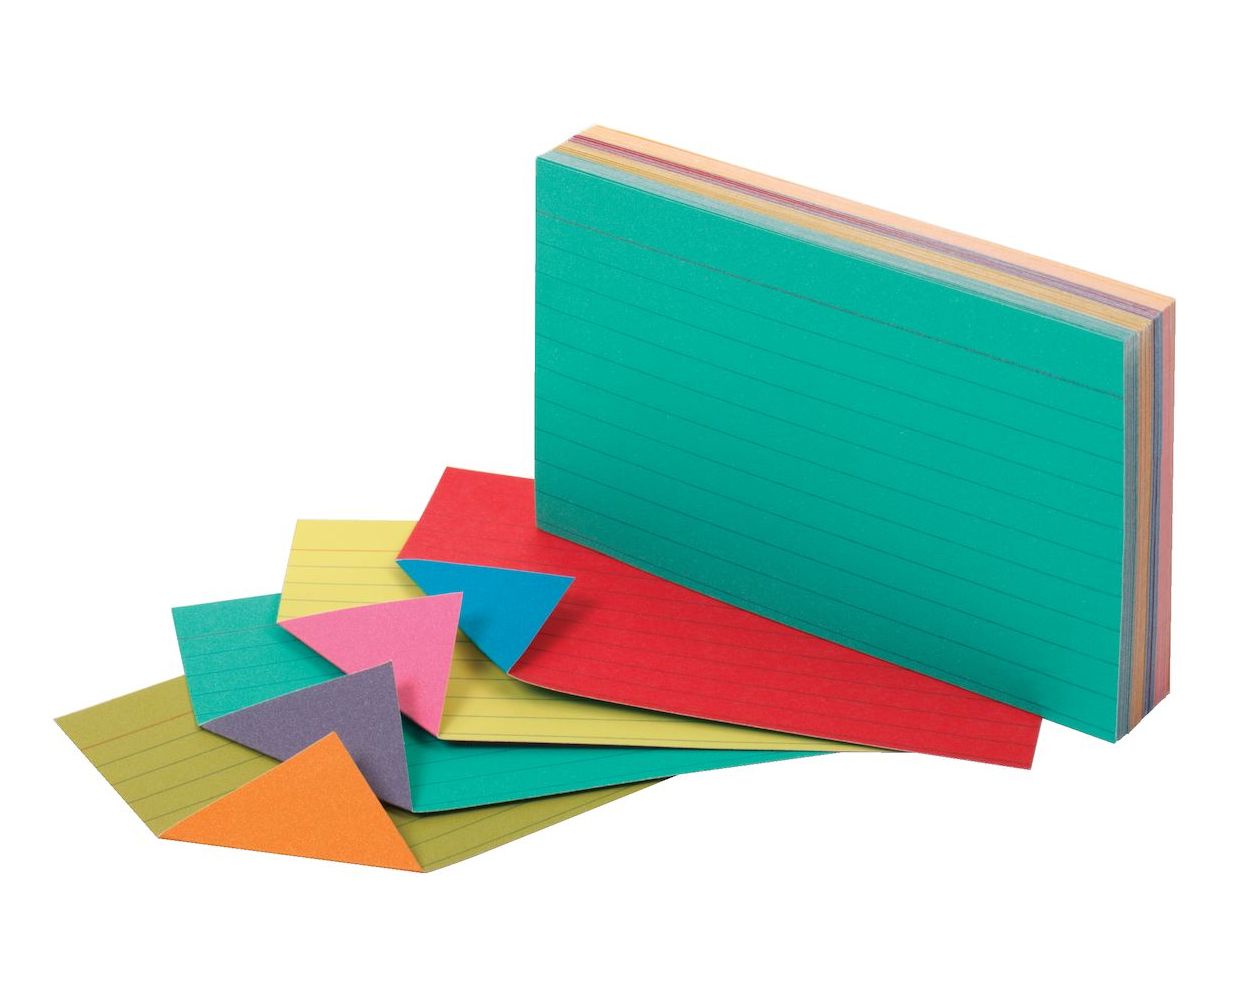 Colored Index Cards 